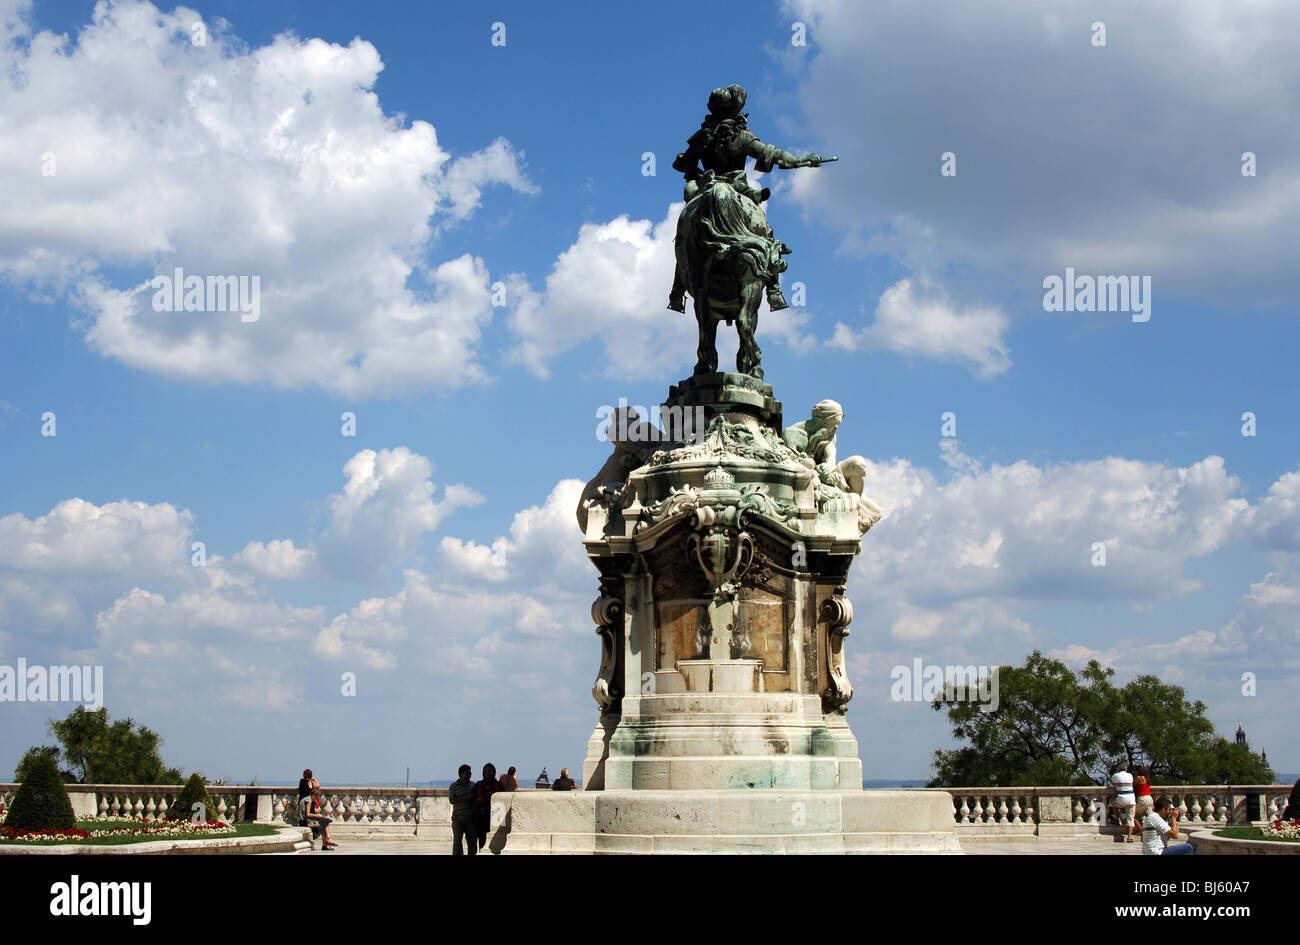 Eugene of Savoy Carignan (1663-1736), called Prince Eugene. French political and military service in Austria. Budapest. Hungary. Stock Photo